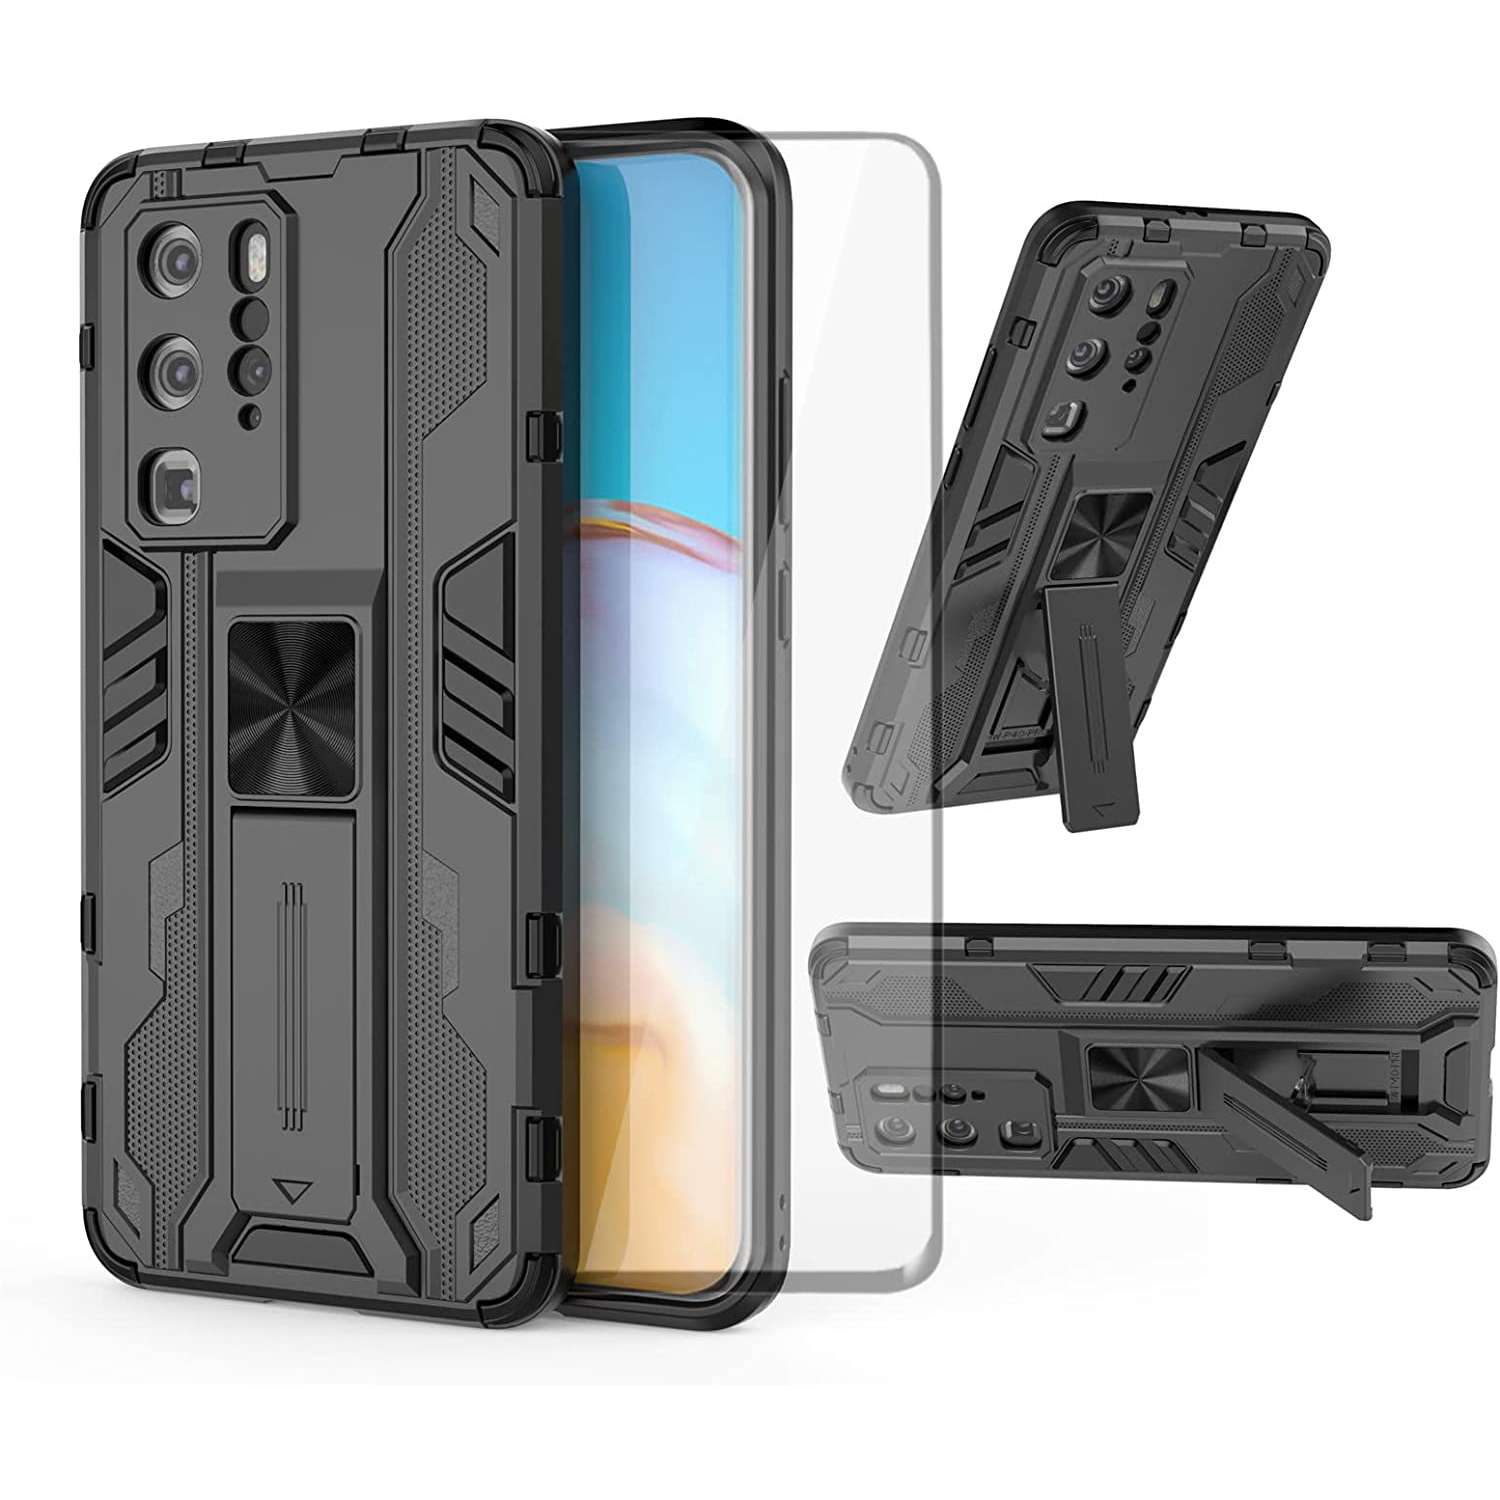 Phone Case for Huawei P40 Pro with Tempered Glass Screen Protector Cover and Slim Stand Hybrid Rugged Magnetic